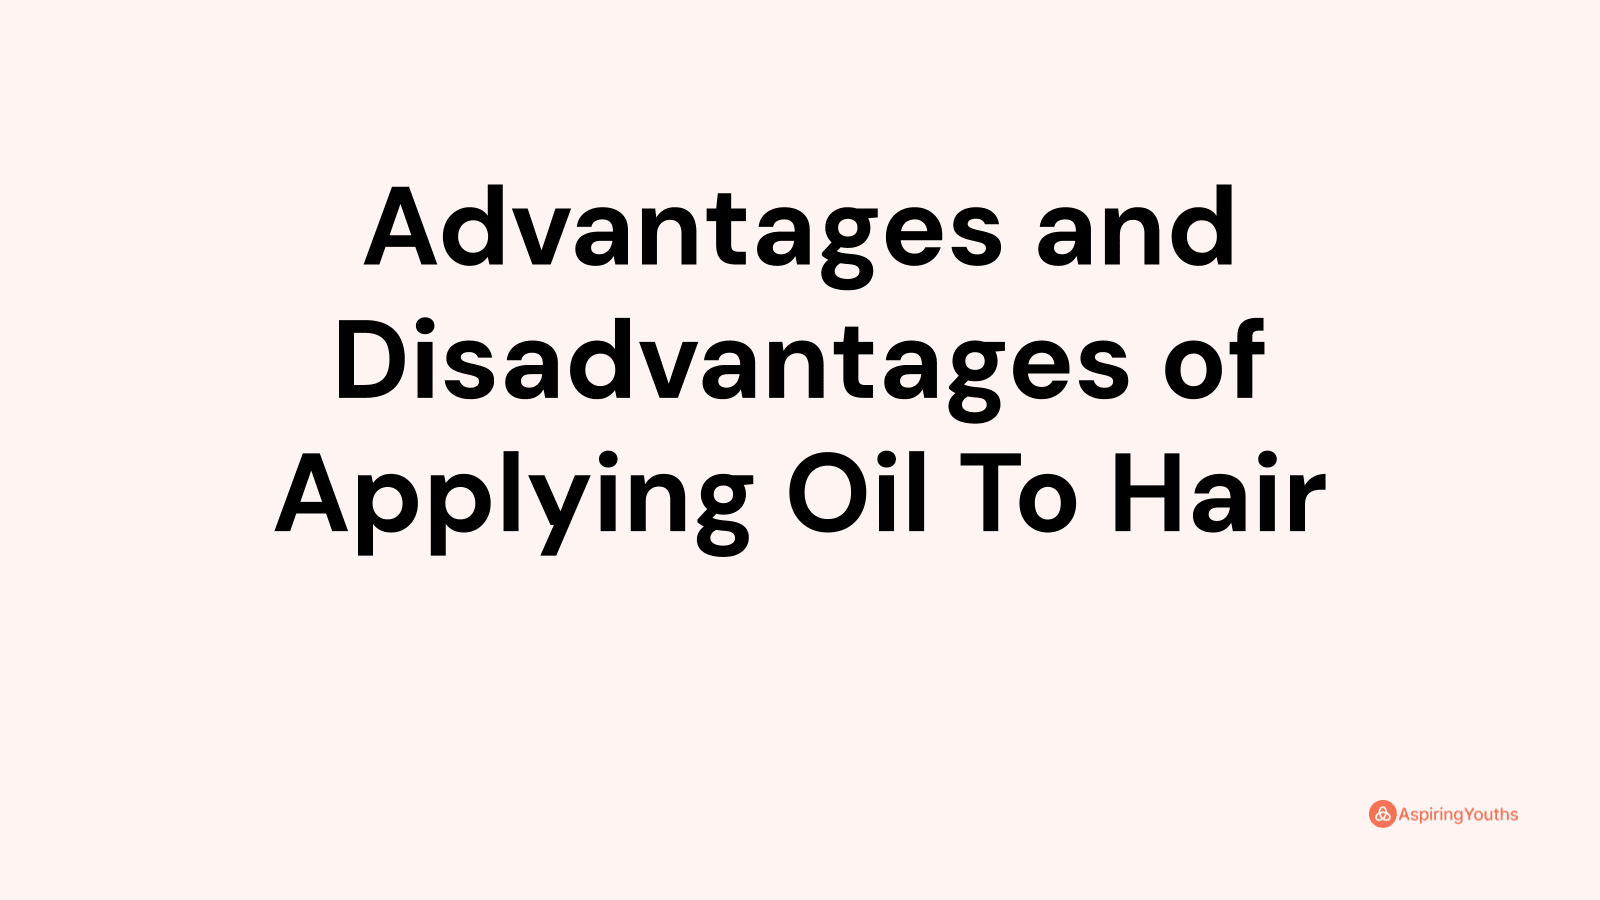 Advantages and disadvantages of Applying Oil To Hair